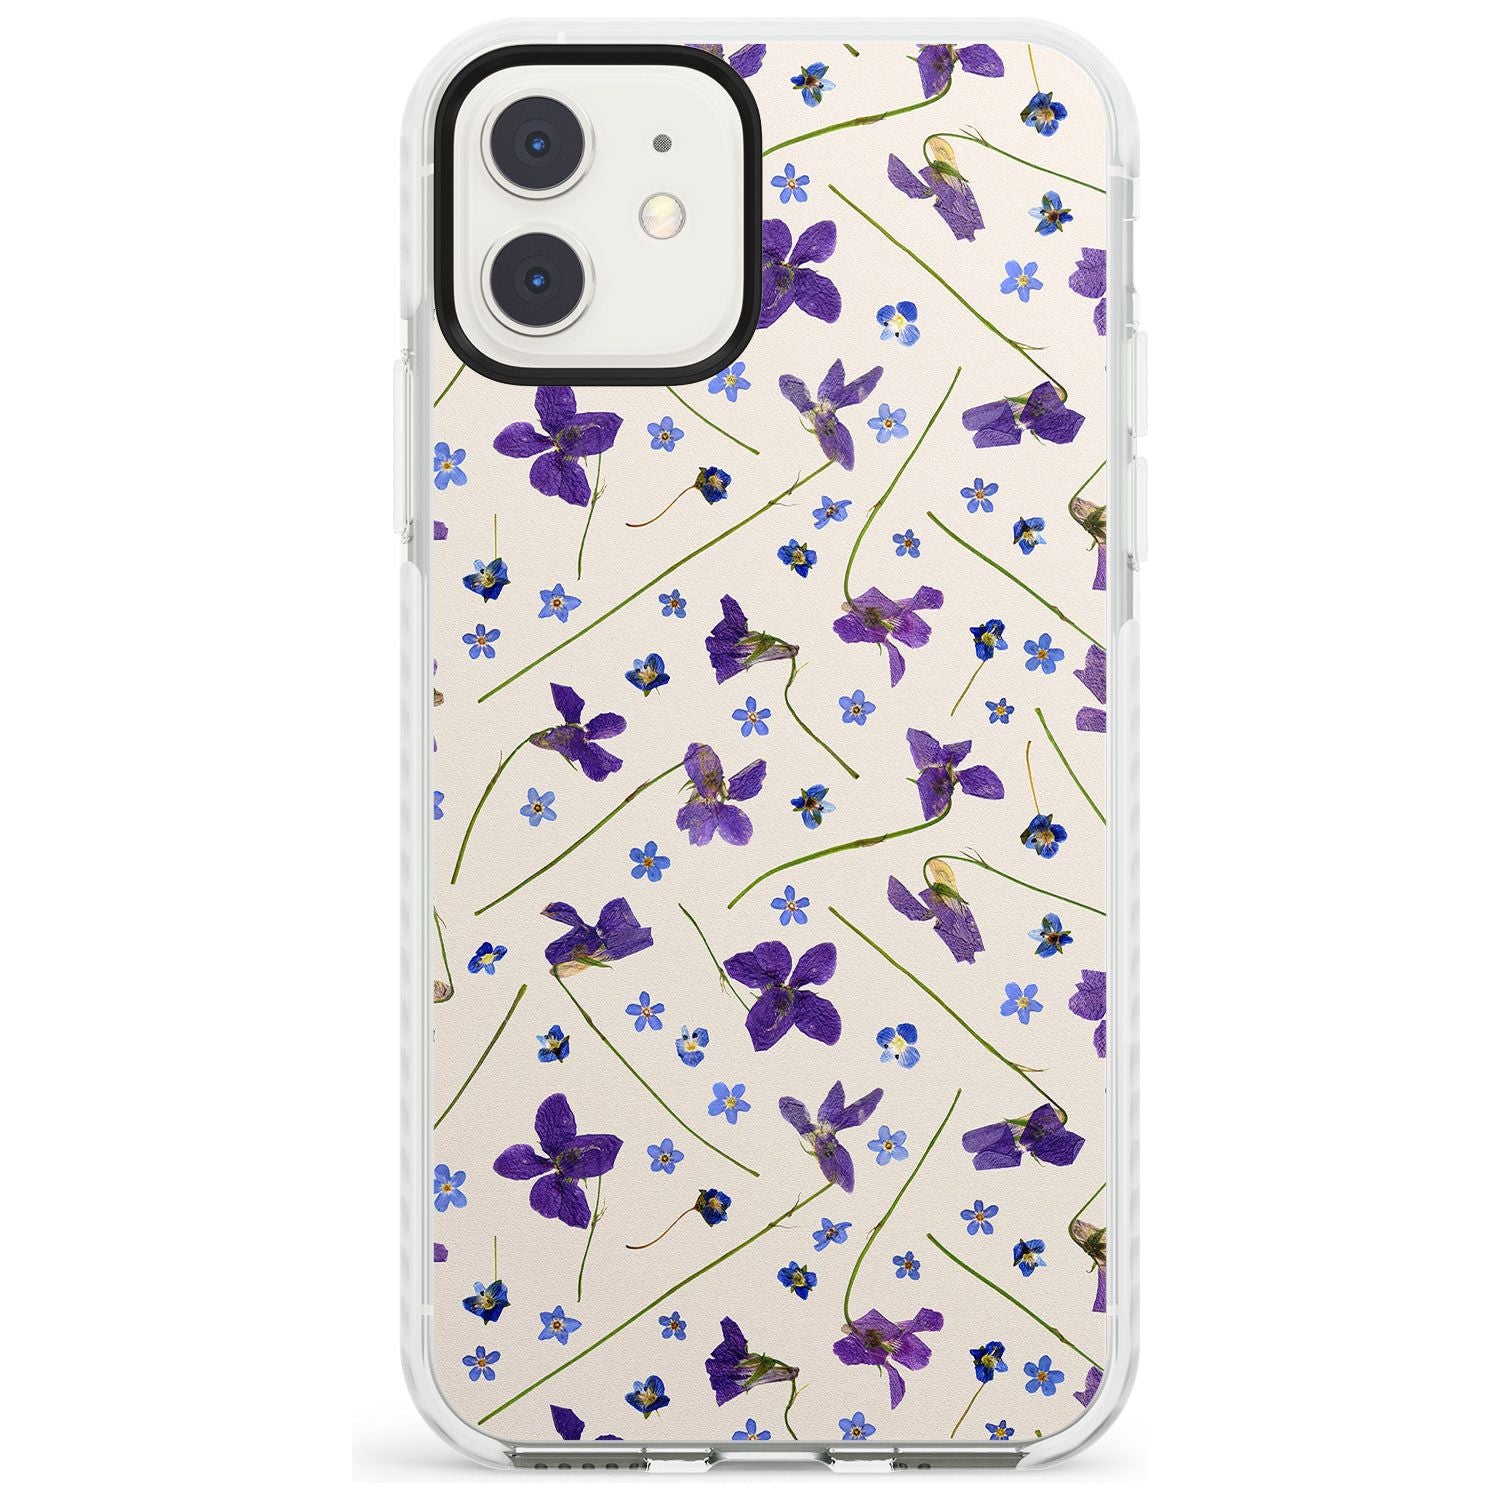 Violet Floral Pattern Design - Cream Impact Phone Case for iPhone 11